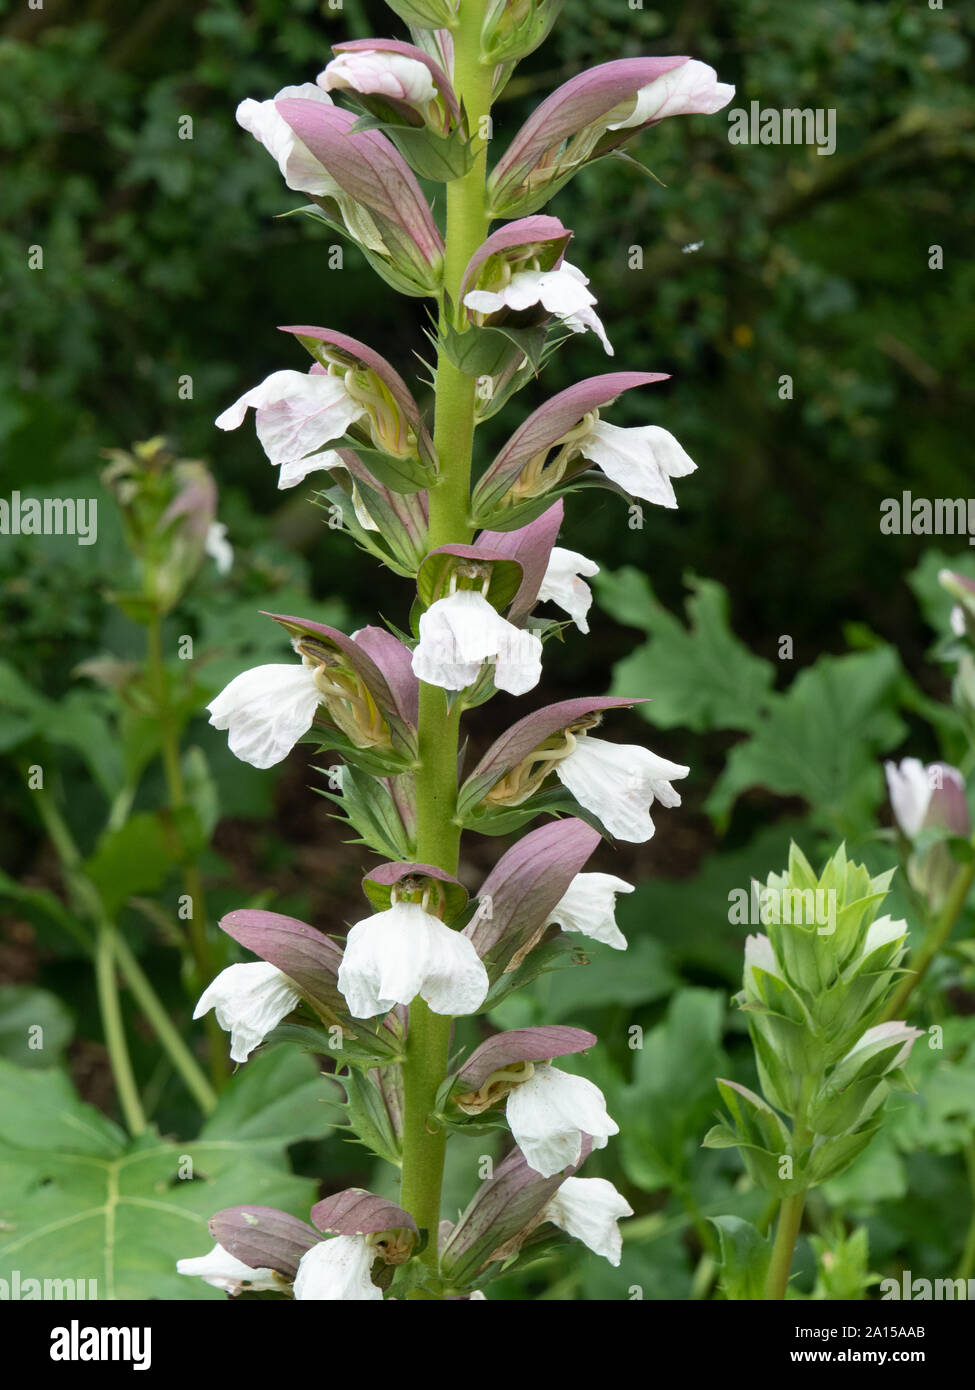 A close up of a section of the flower spike of Acanthus mollis Stock Photo